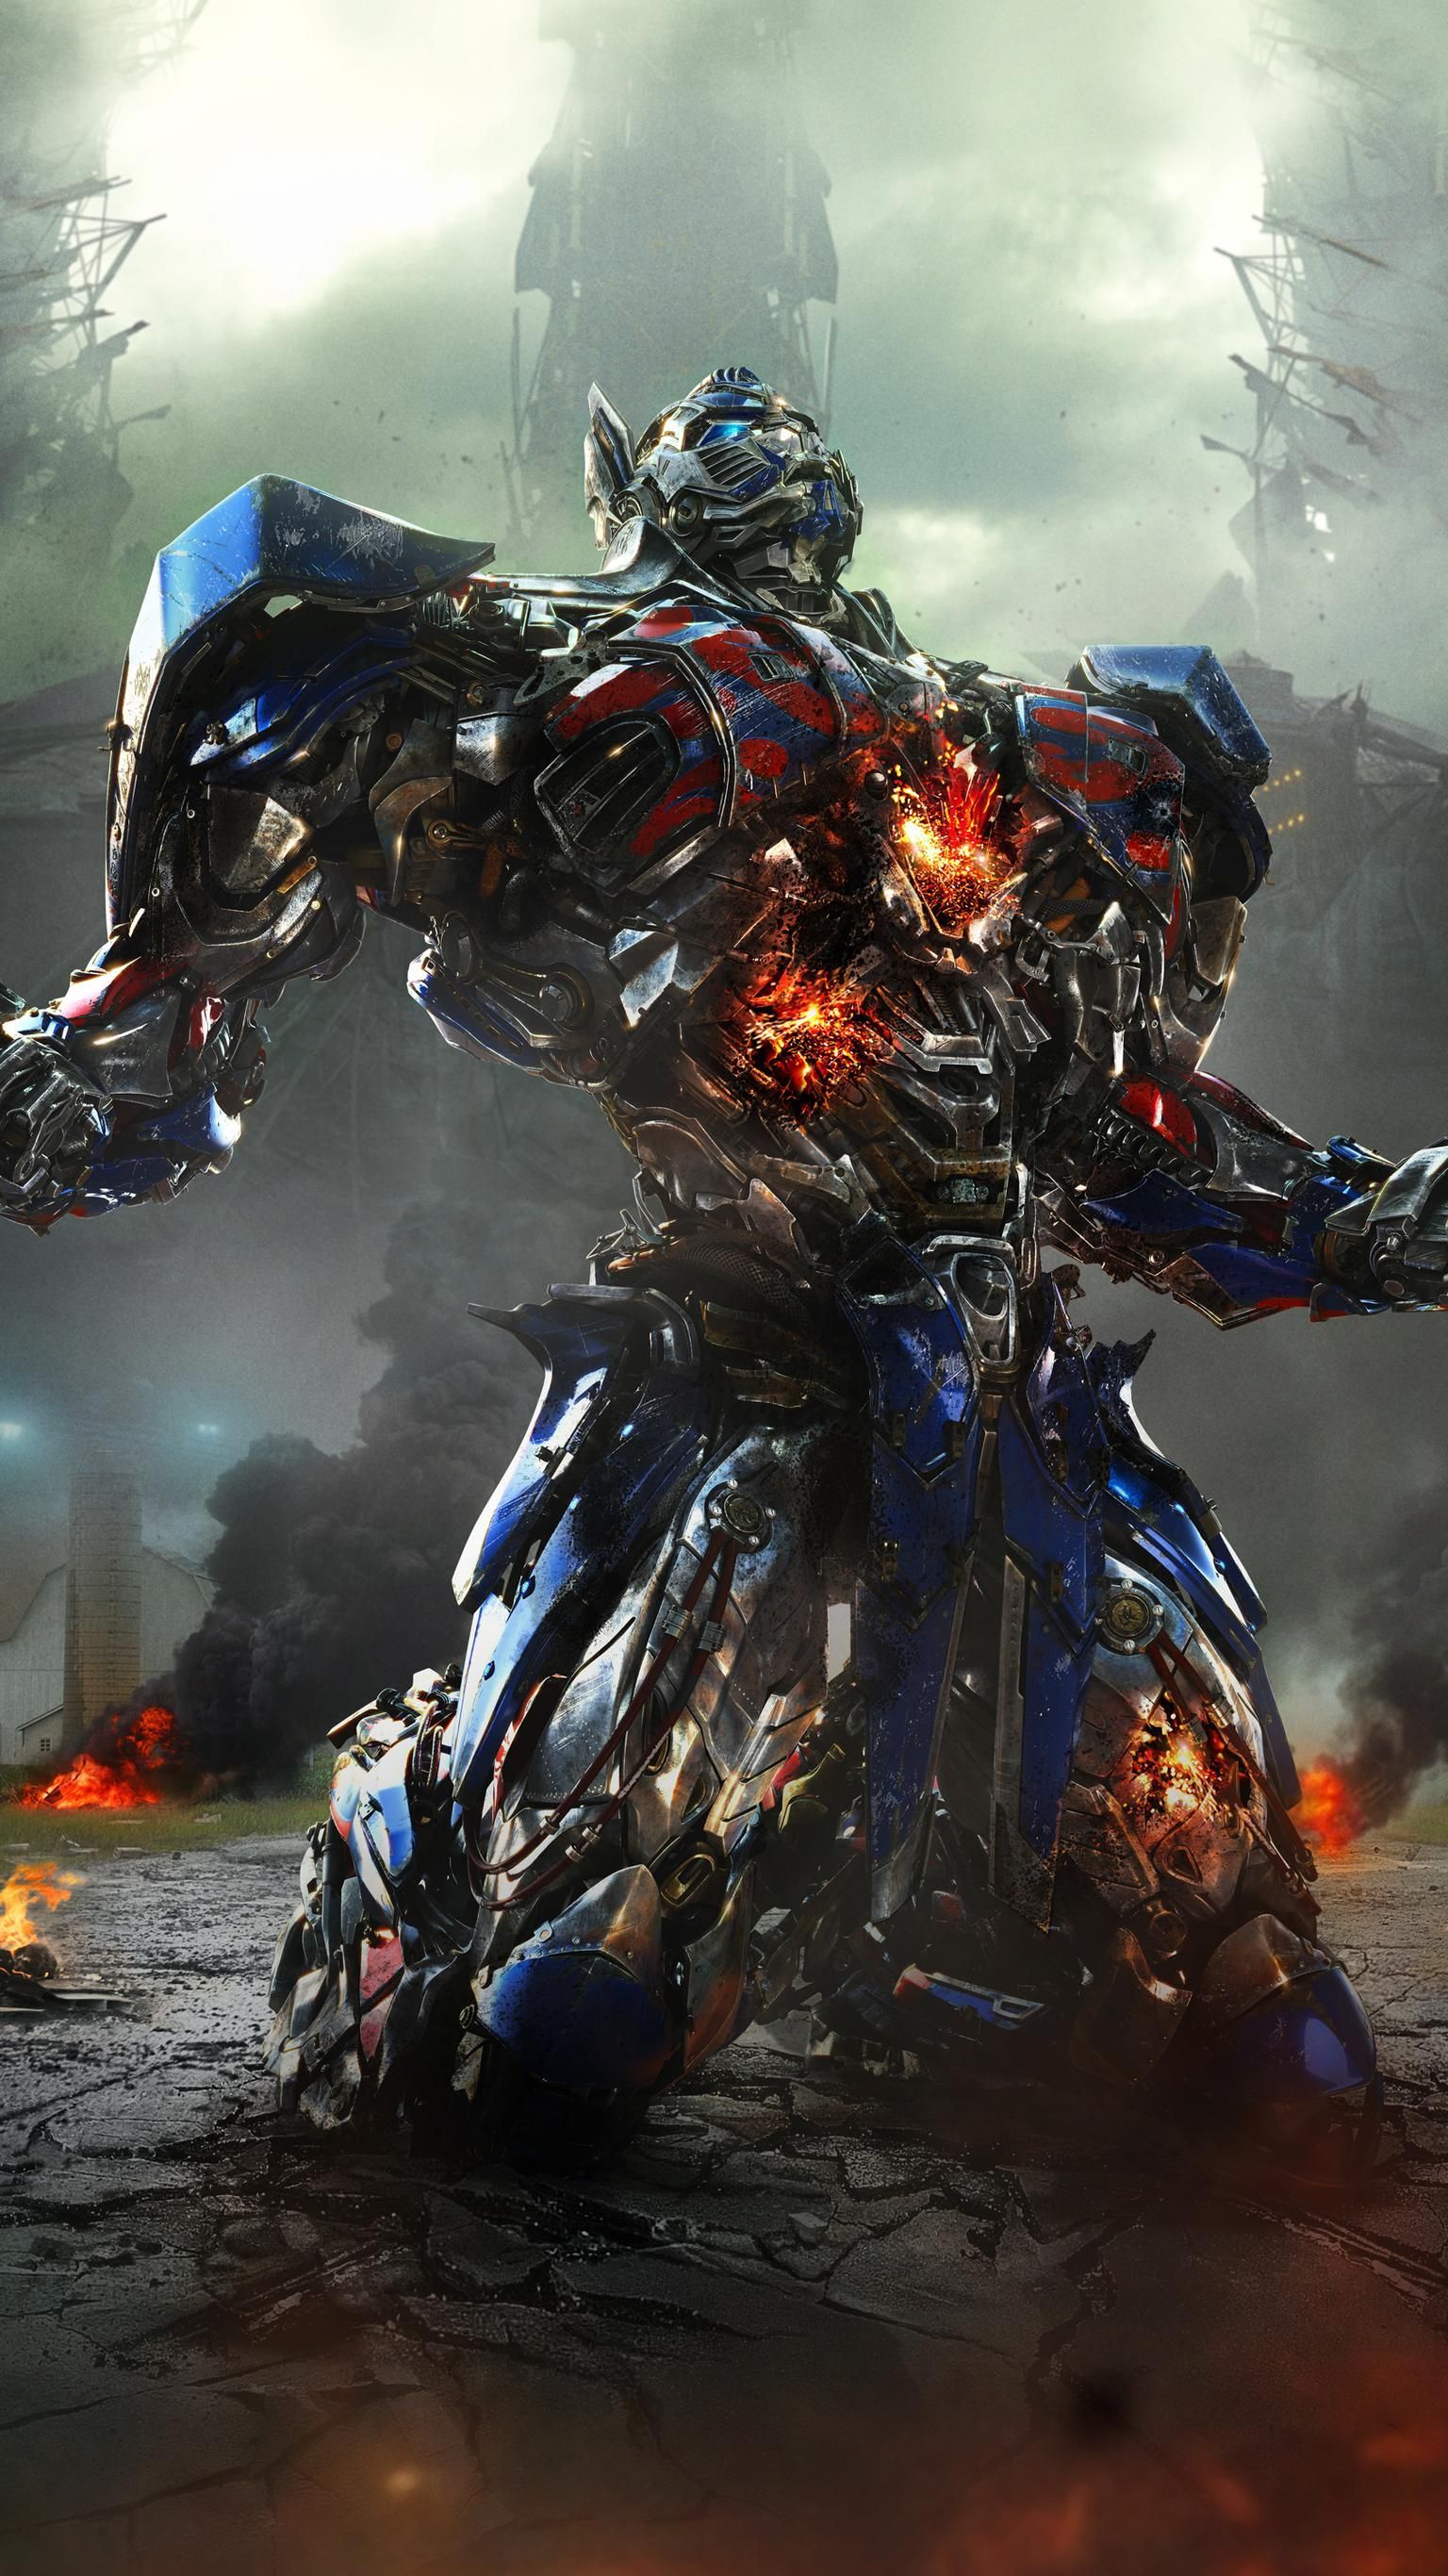 Transformers: Age of Extinction (2014) Phone Wallpaper. Moviemania. Optimus prime wallpaper transformers, Optimus prime wallpaper, Transformers optimus